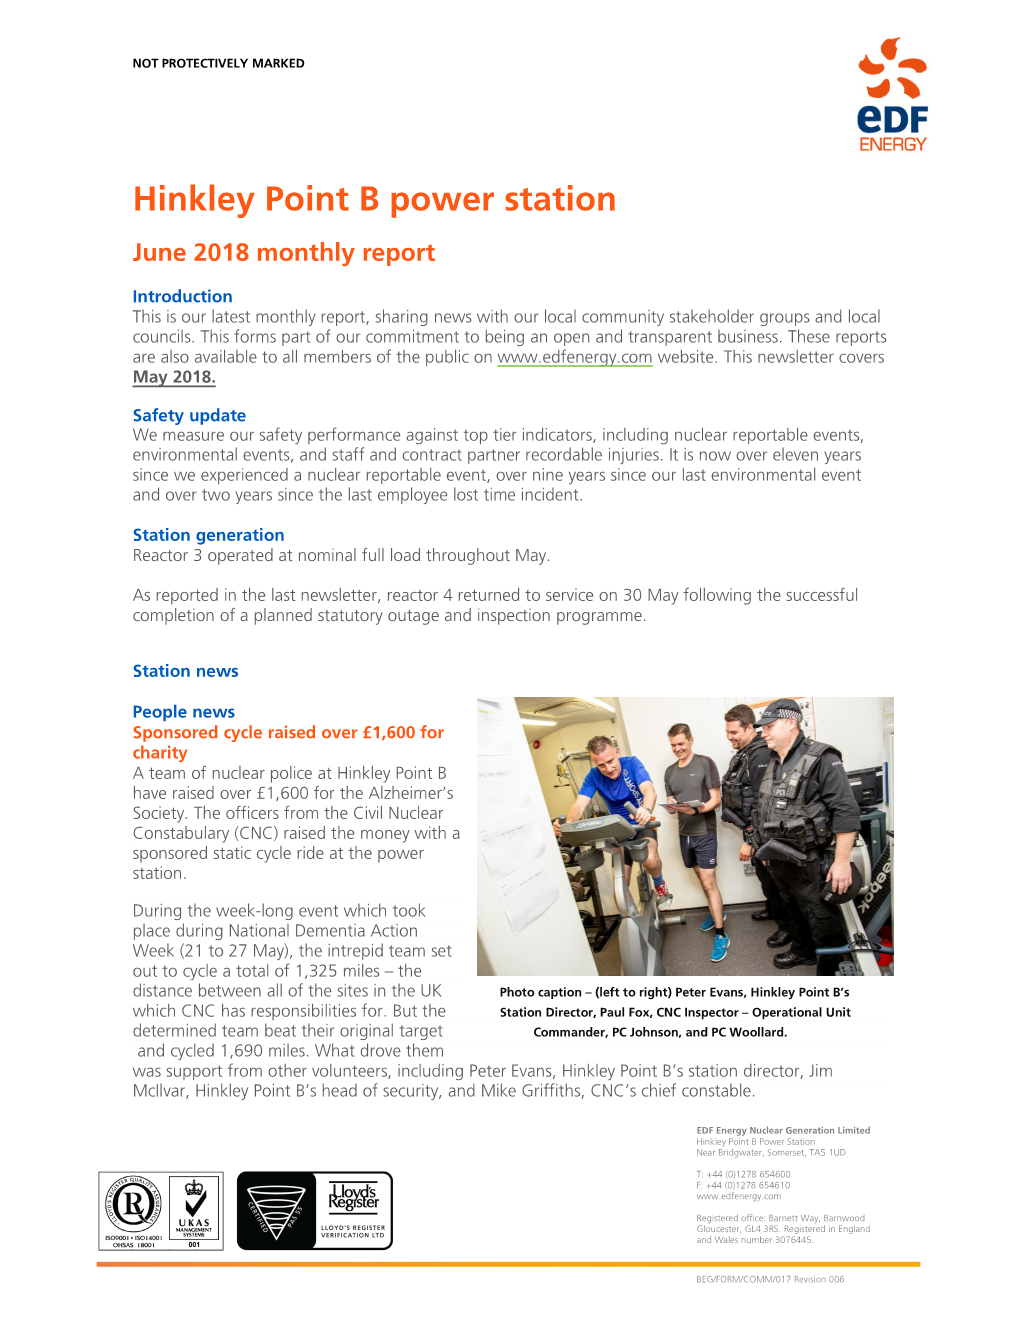 Hinkley Point B Power Station June 2018 Monthly Report